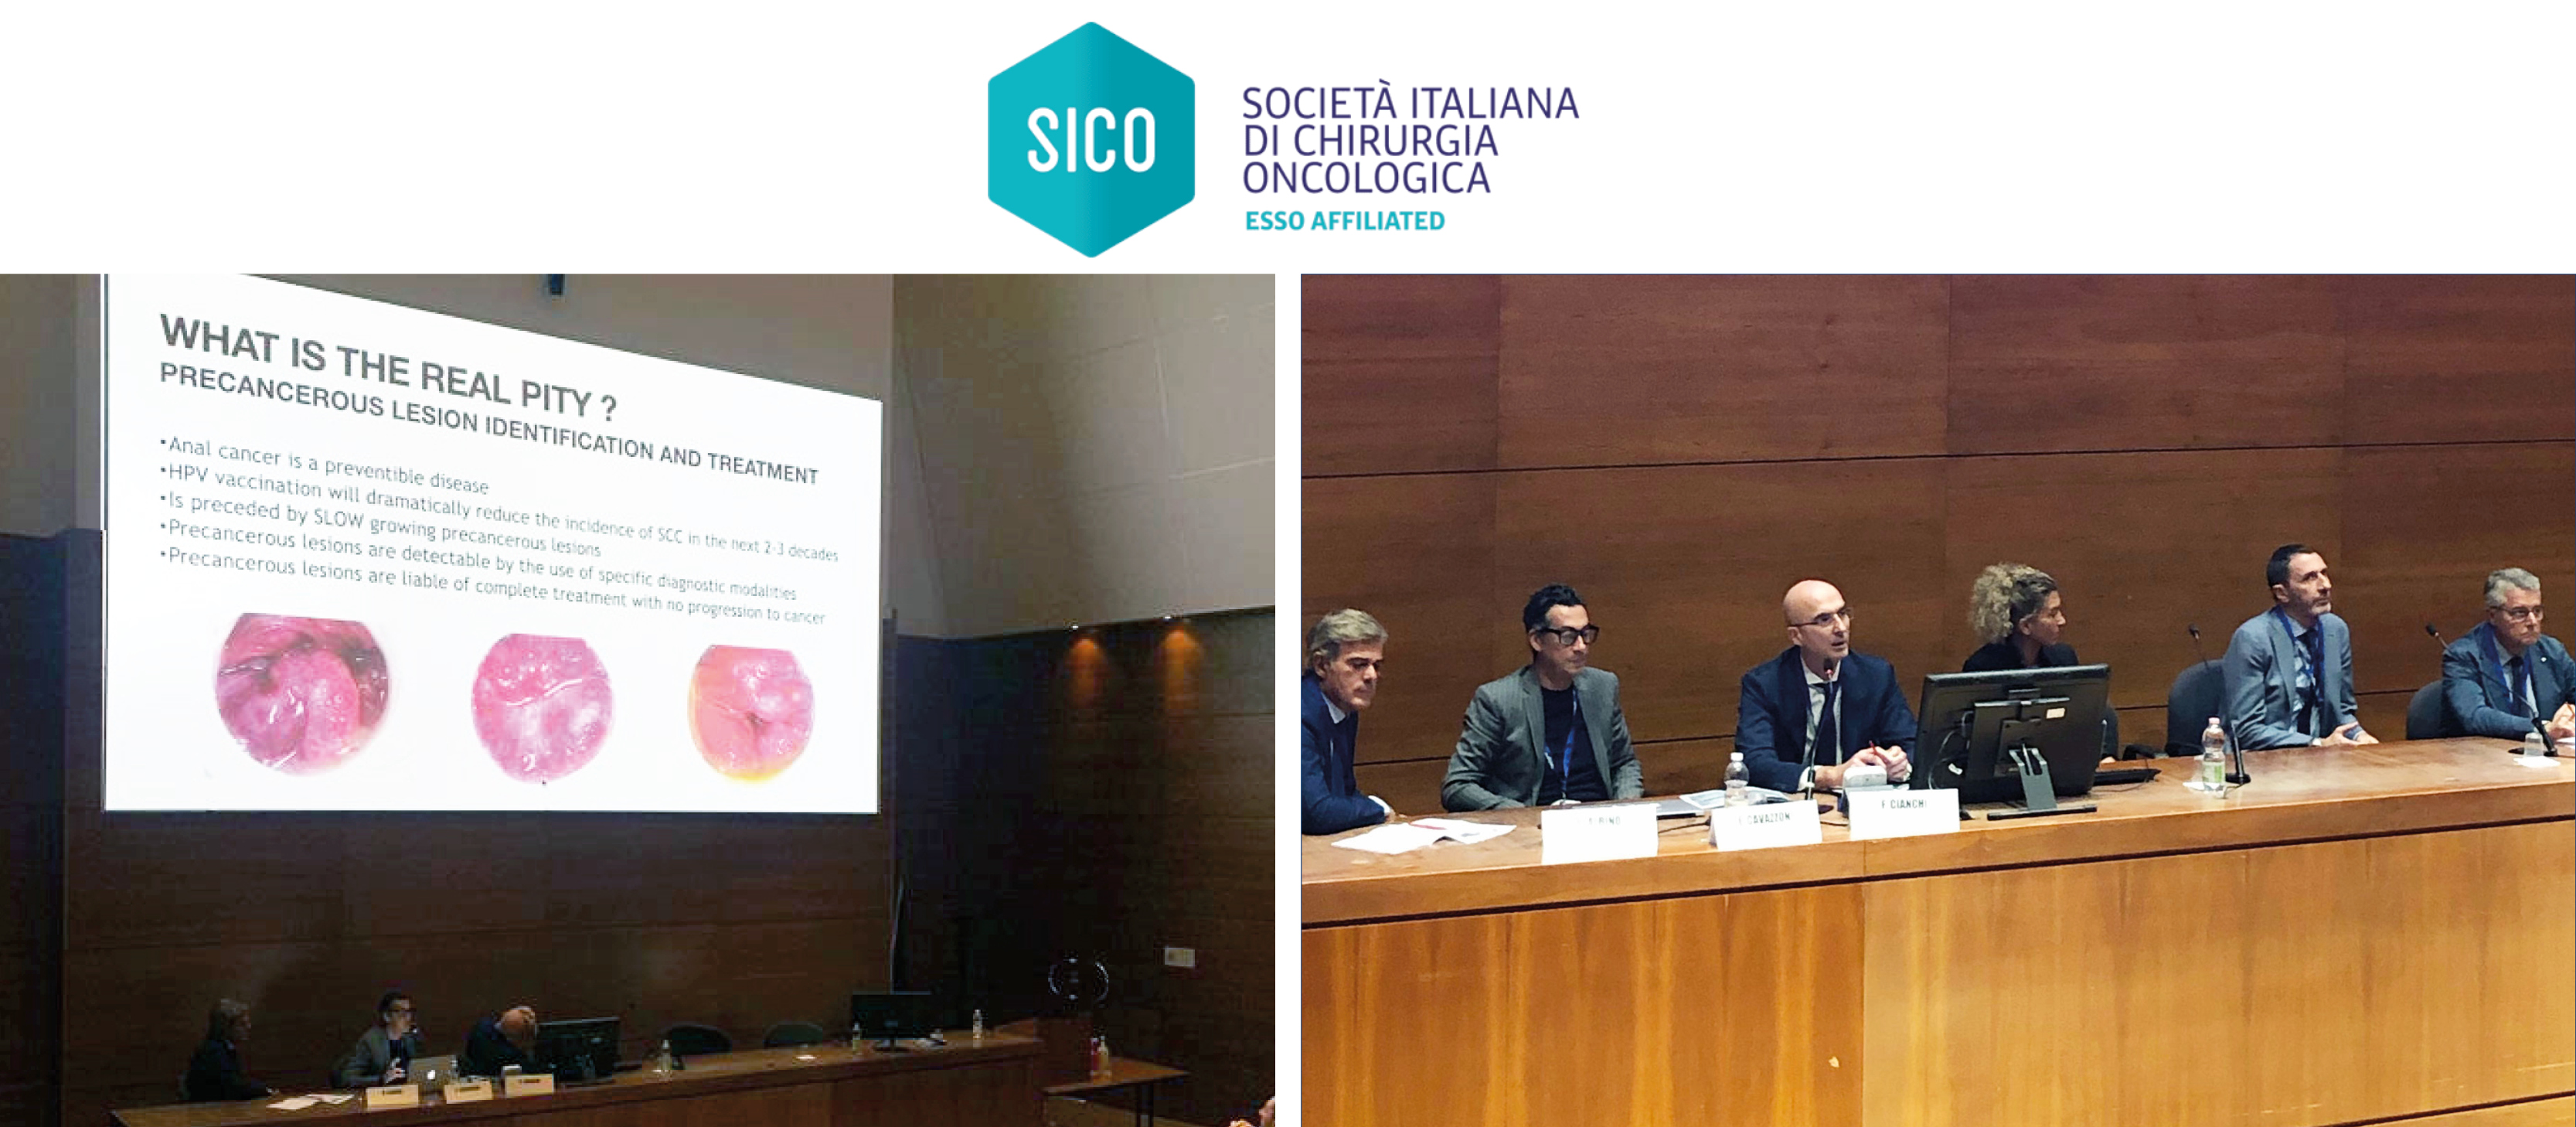 On 25-27 September THD was in Siena to participate in the 5th International Surgical Conference of Surgical Oncology.